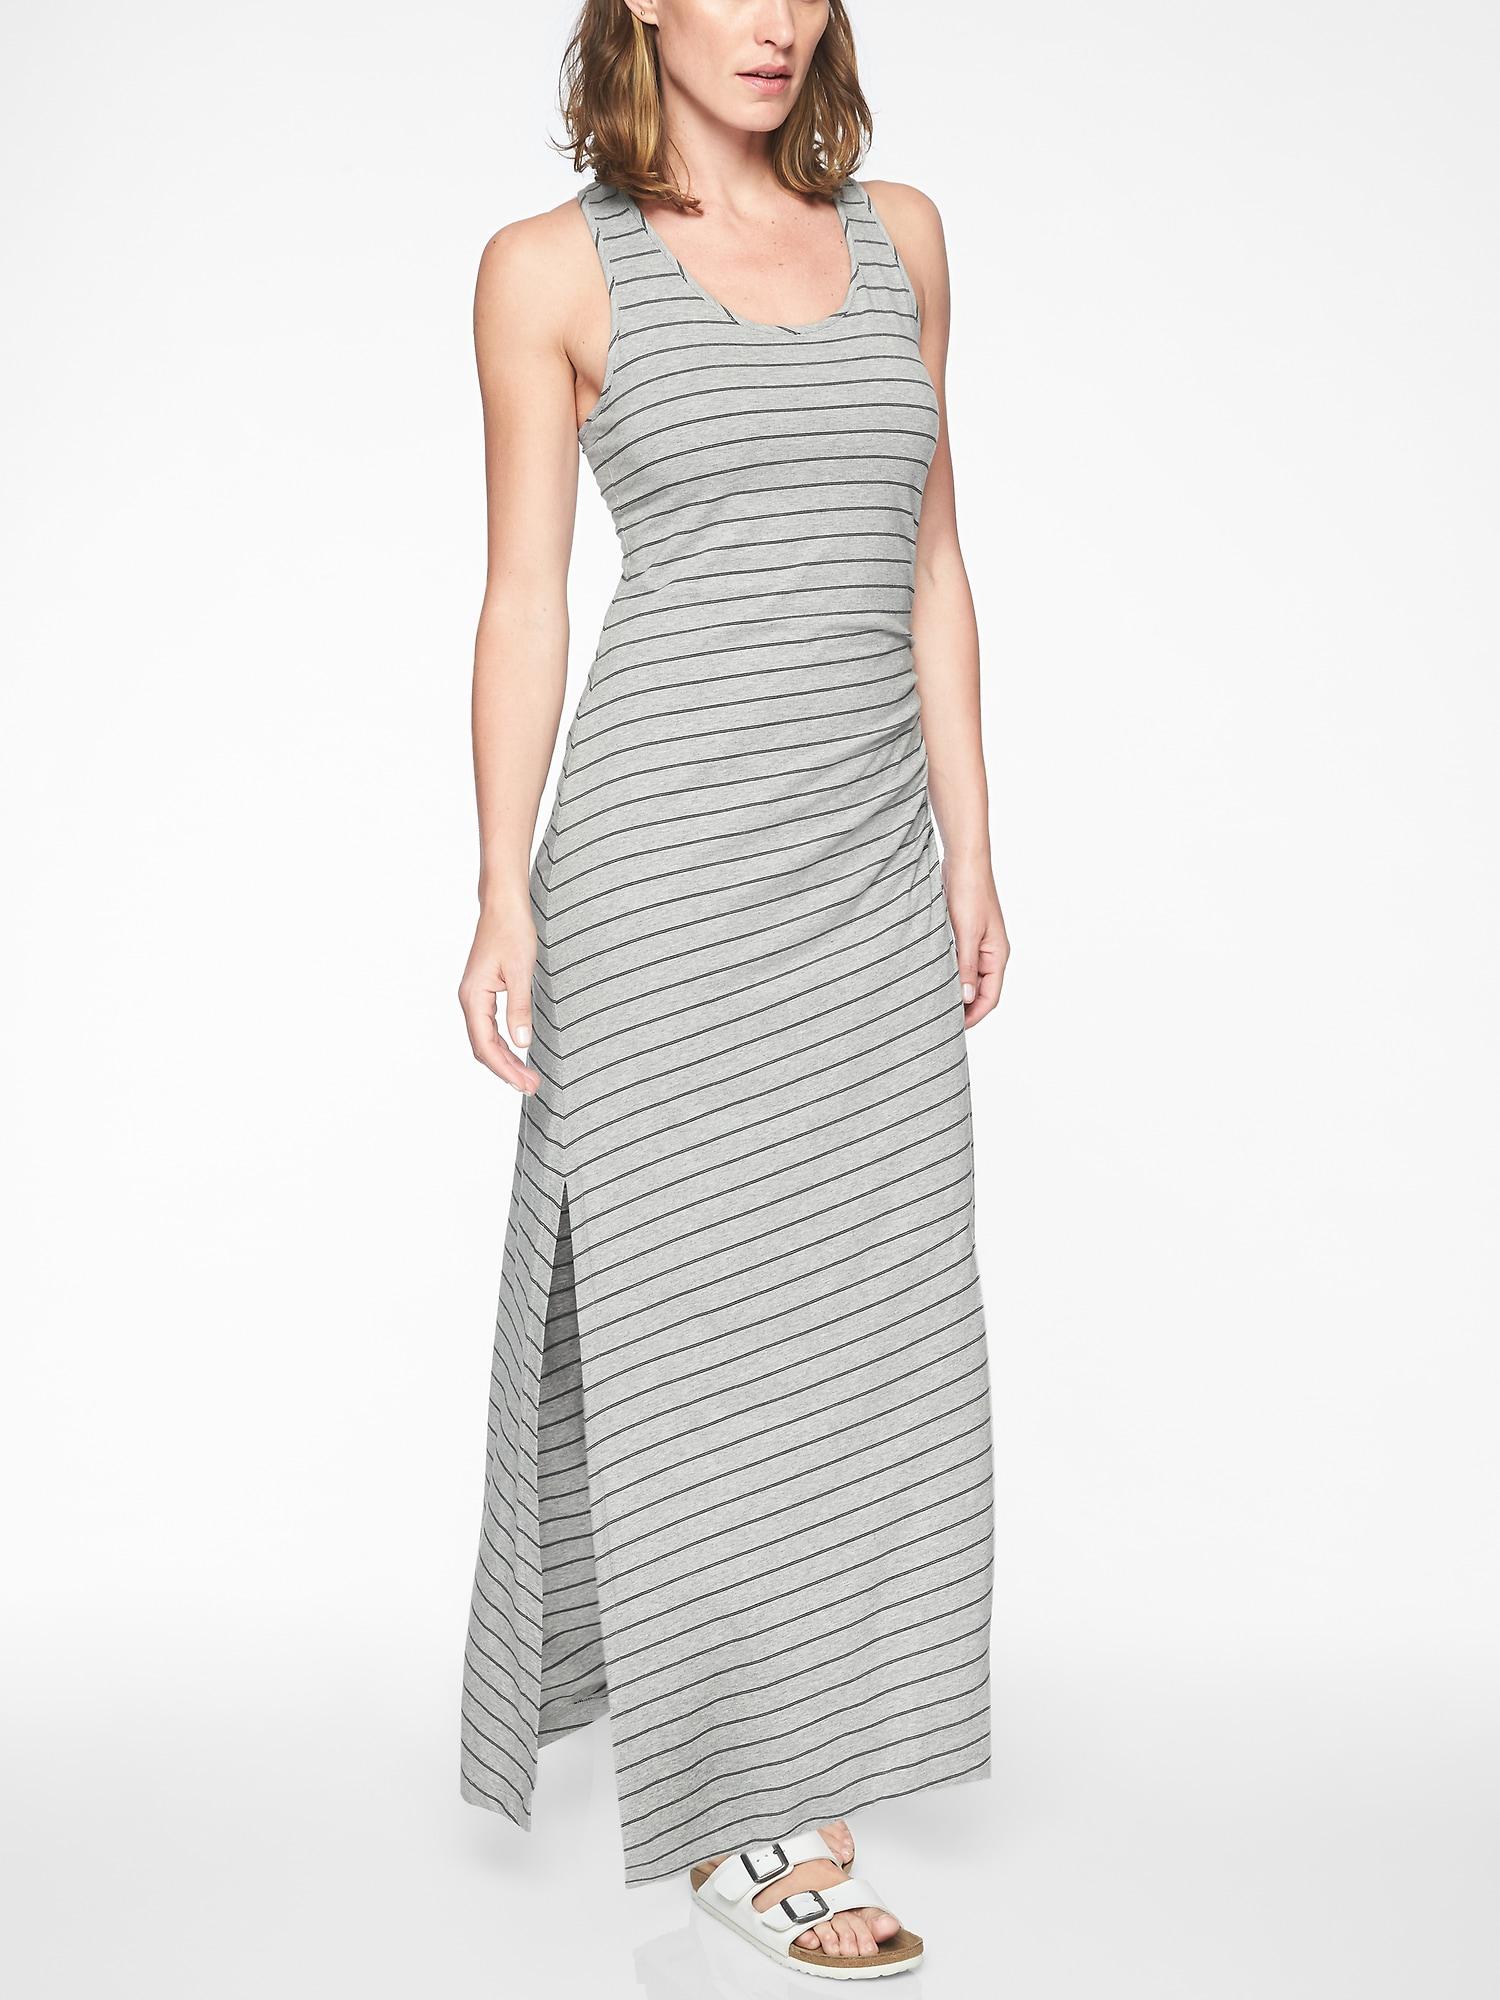 Athleta Long Dress Factory Sale, UP TO ...